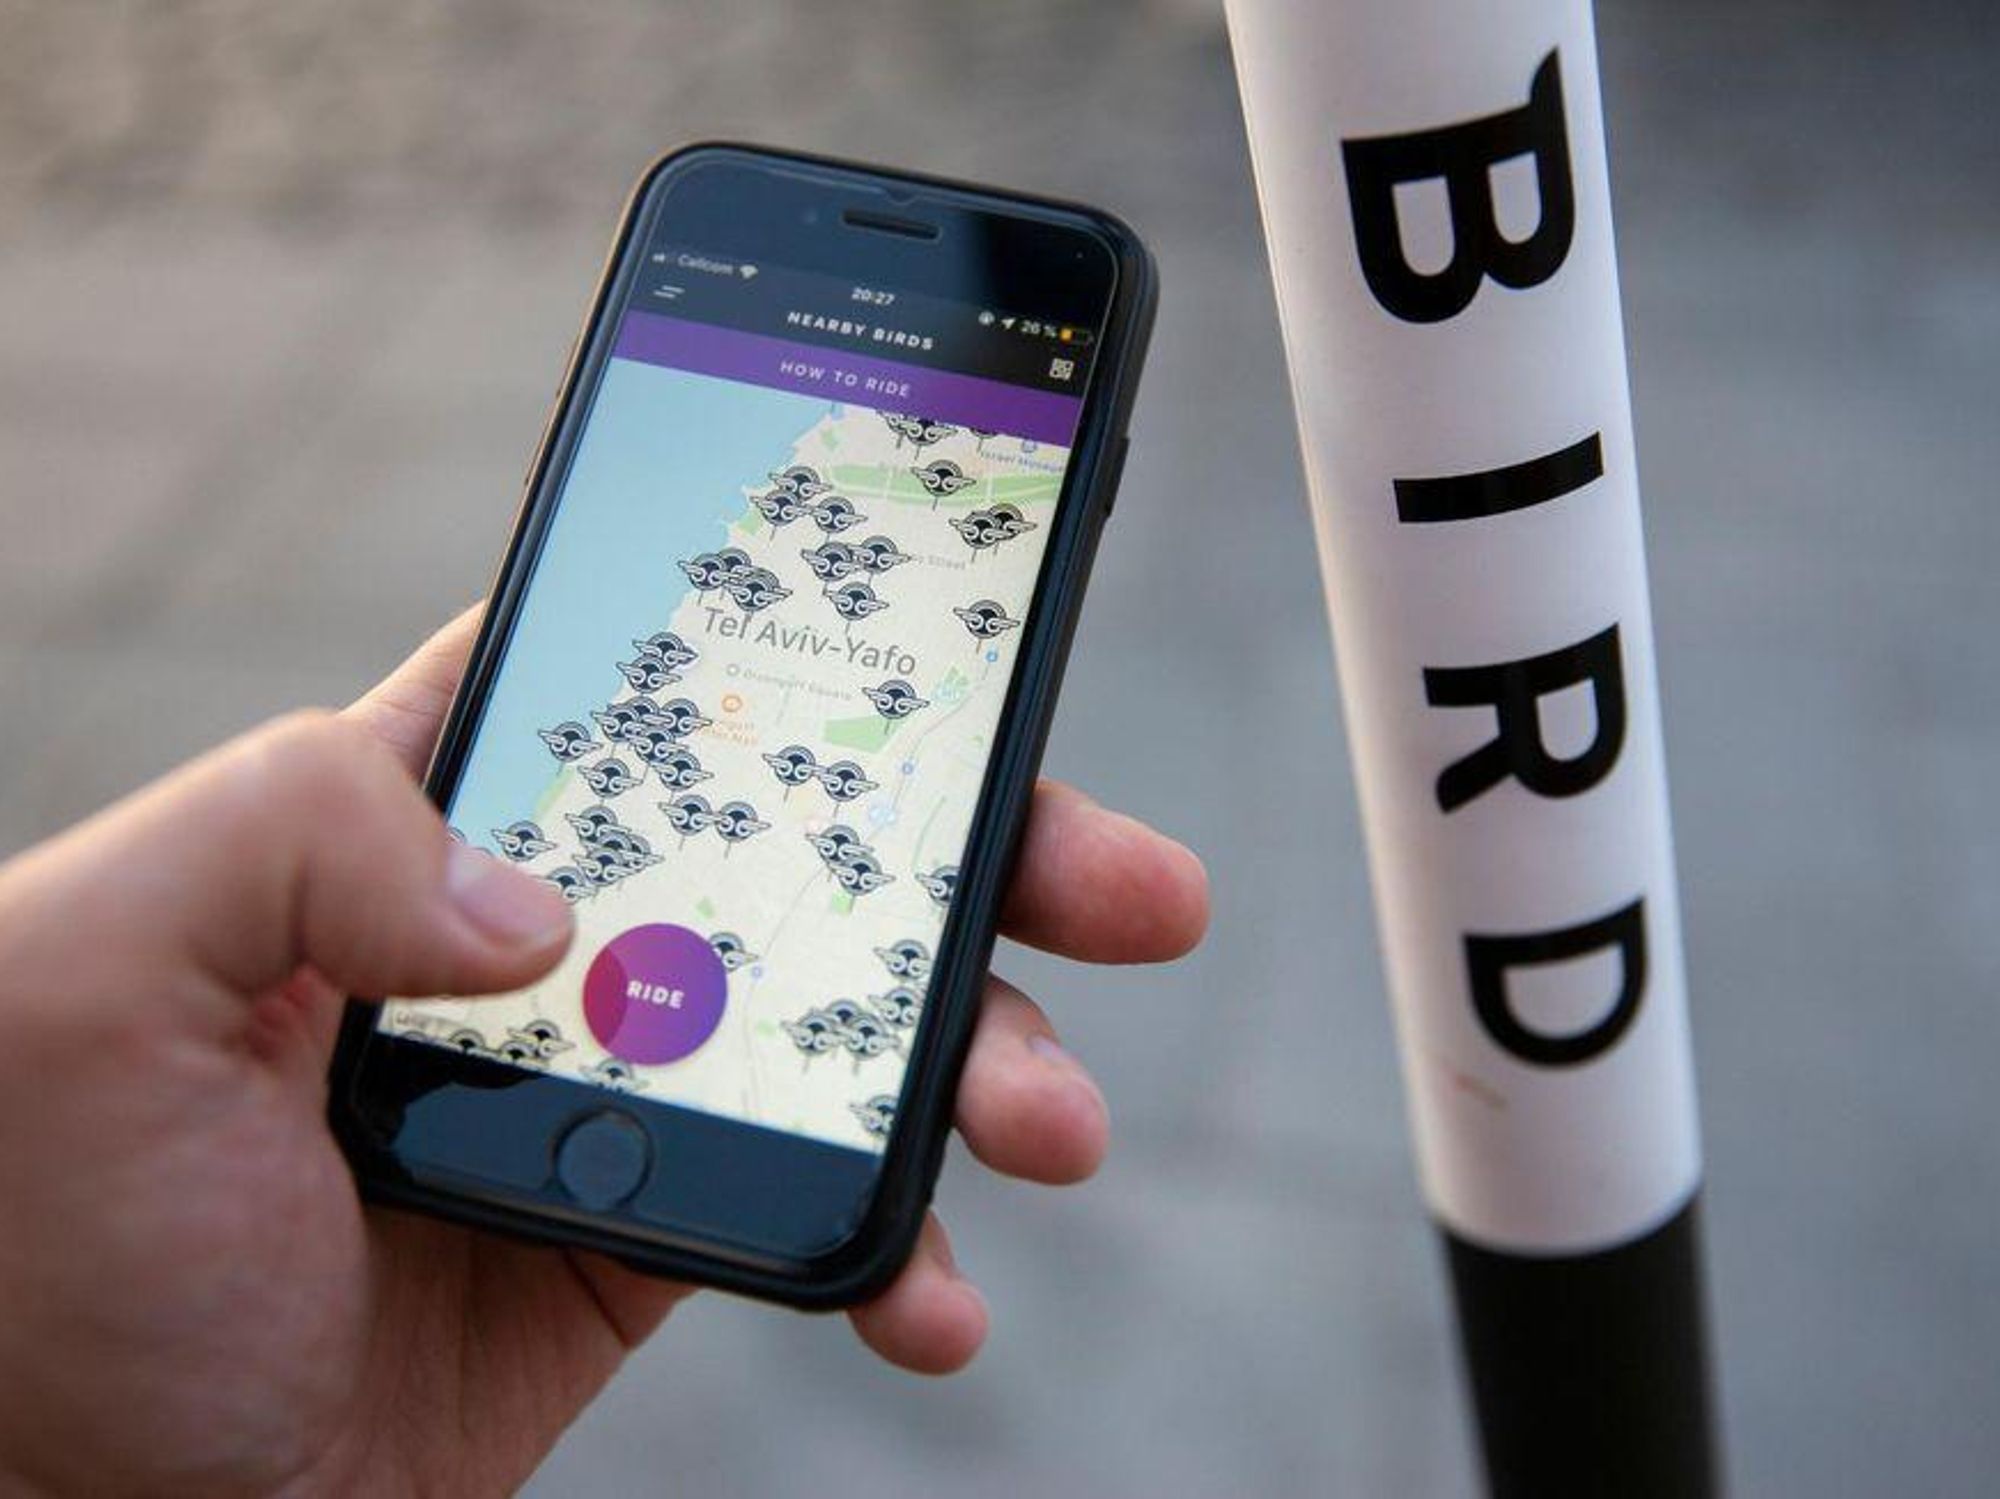 You Can Now Find Nearby Bird Scooters on Google Maps